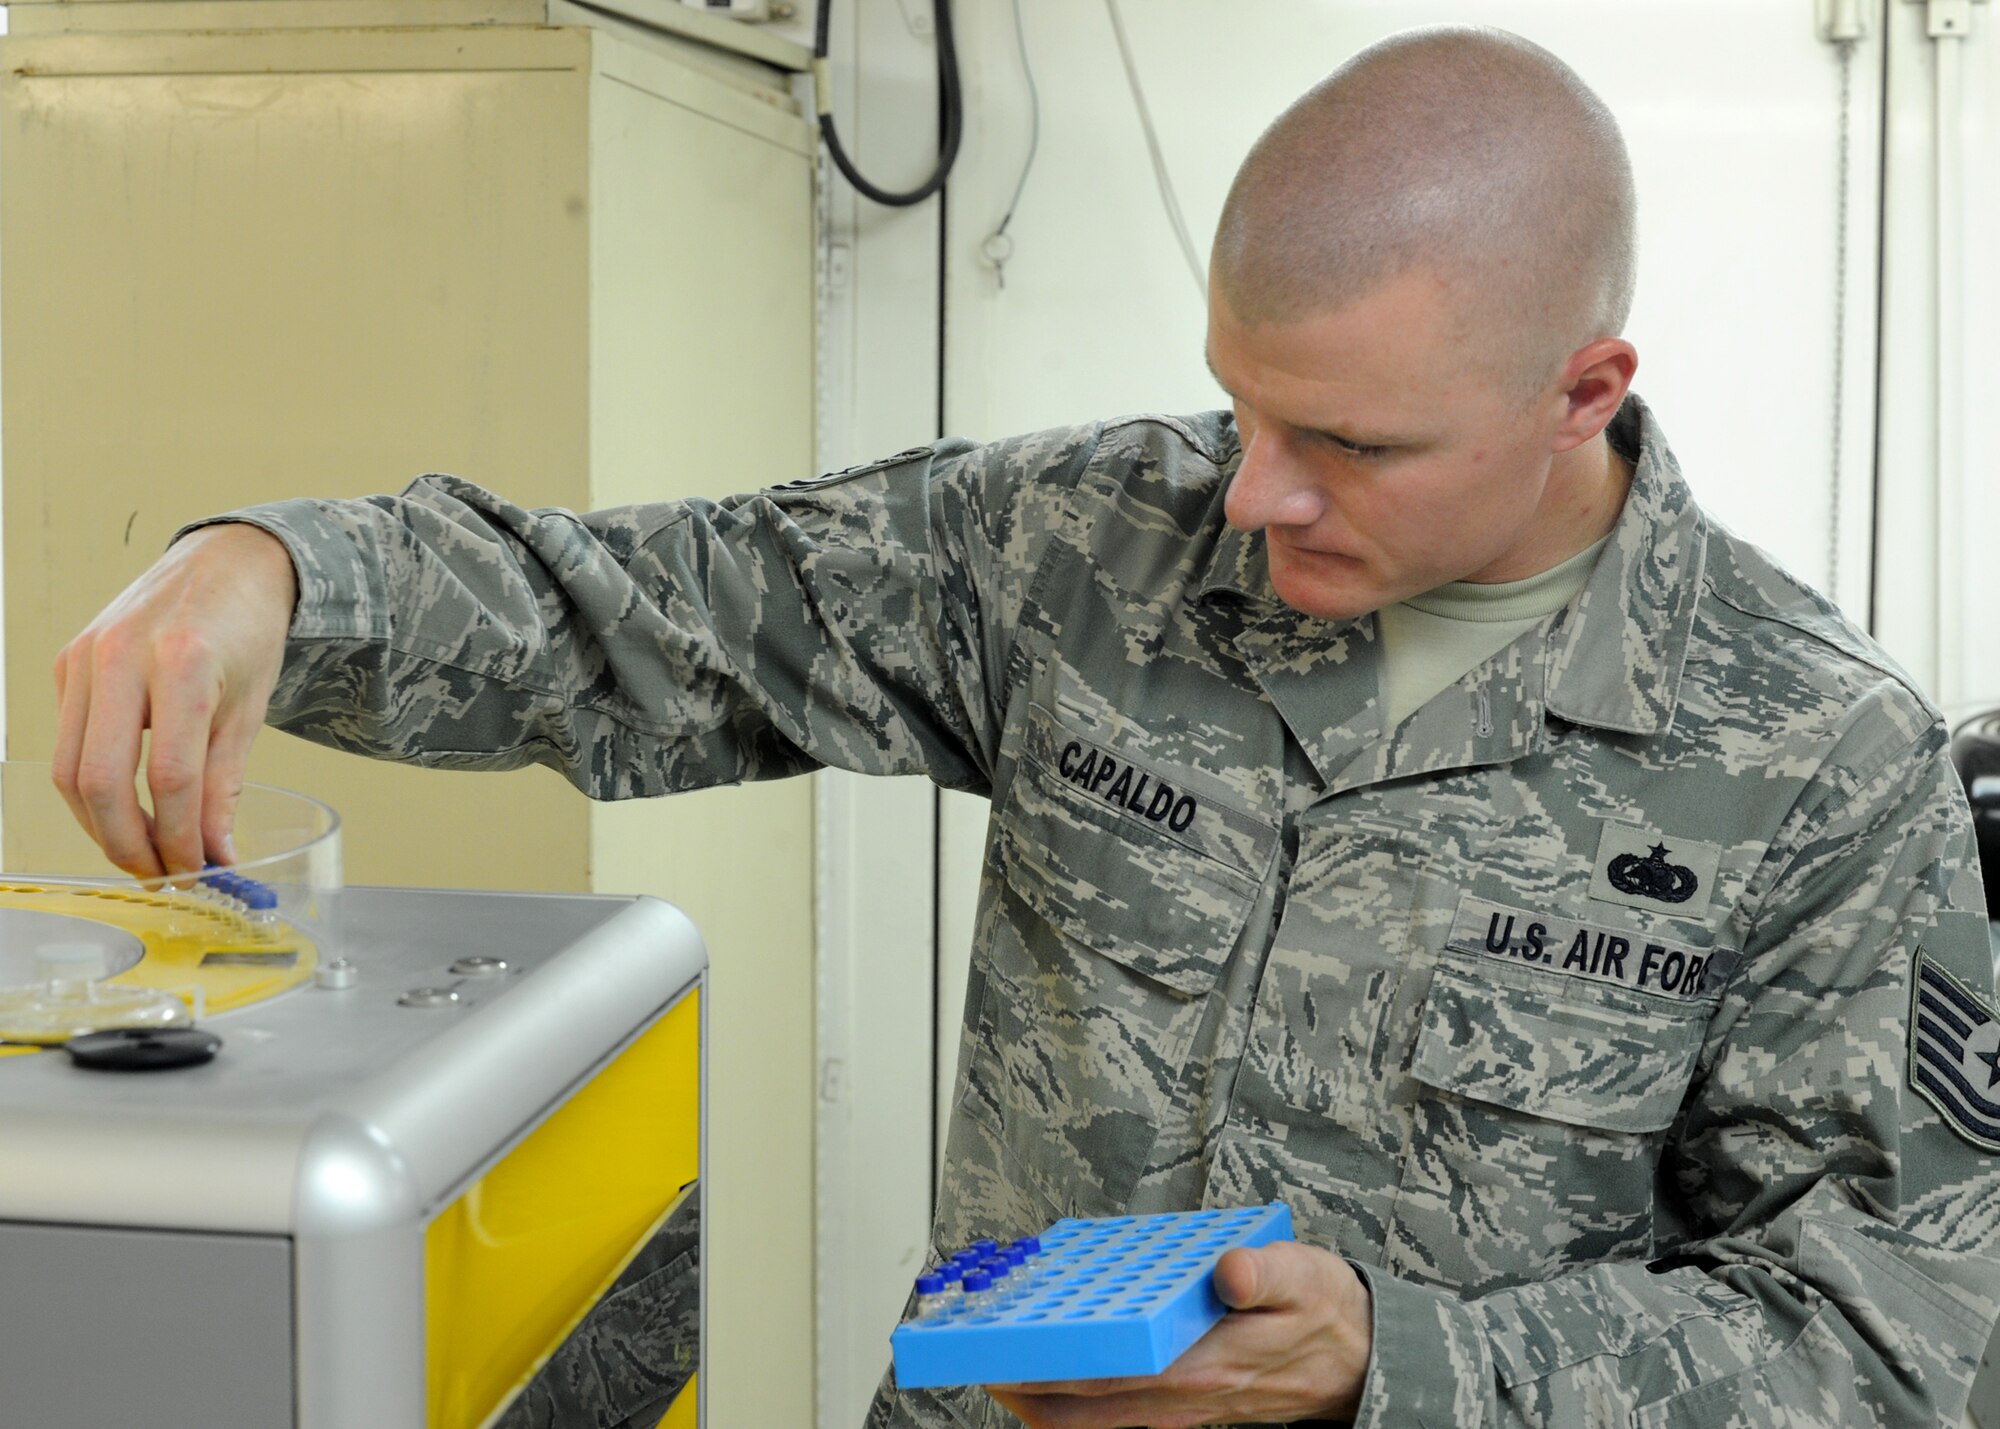 Tech. Sgt. Thomas Capaldo inserts test tubes into a device that conducts a sulfur analysis on fuels in the 379th Expeditionary Logistics Readiness Squadron Air Force Petroleum Laboratory in Southwest Asia, June 12, 2013. This test is one of 15 conducted to ensure the quality of fuels used on aircraft throughout the area of responsibility. Capaldo is the 379th ELRS AFPA NCO in charge of fuels deployed from Dyess Air Force Base, Texas. (U.S. Air Force photo/Senior Airman Bahja J. Jones)